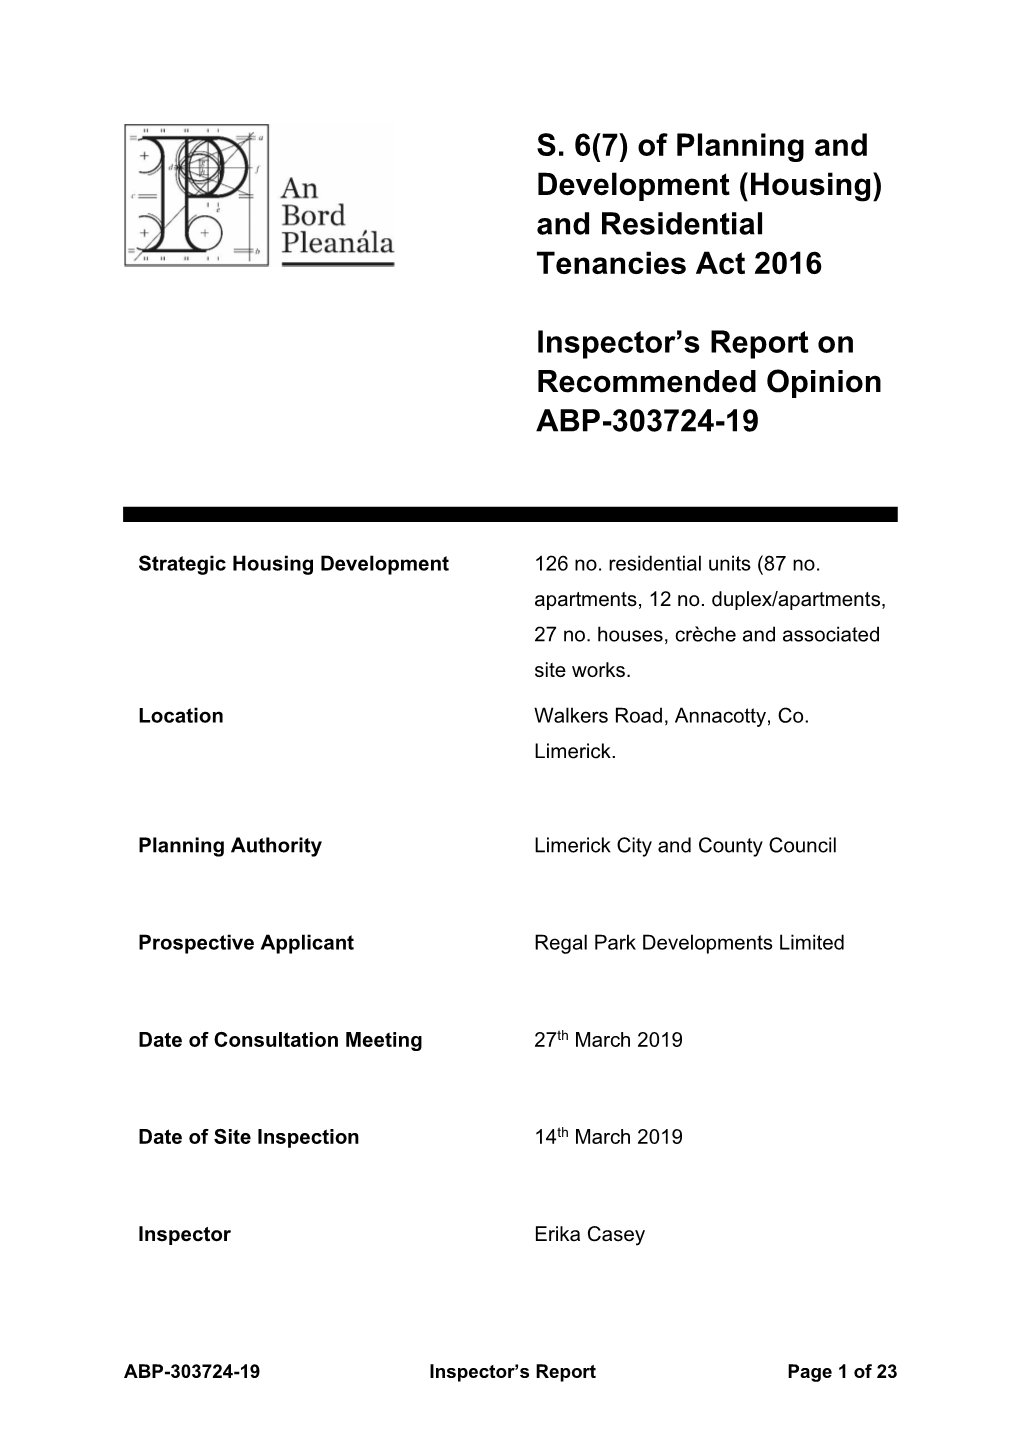 (Housing) and Residential Tenancies Act 2016